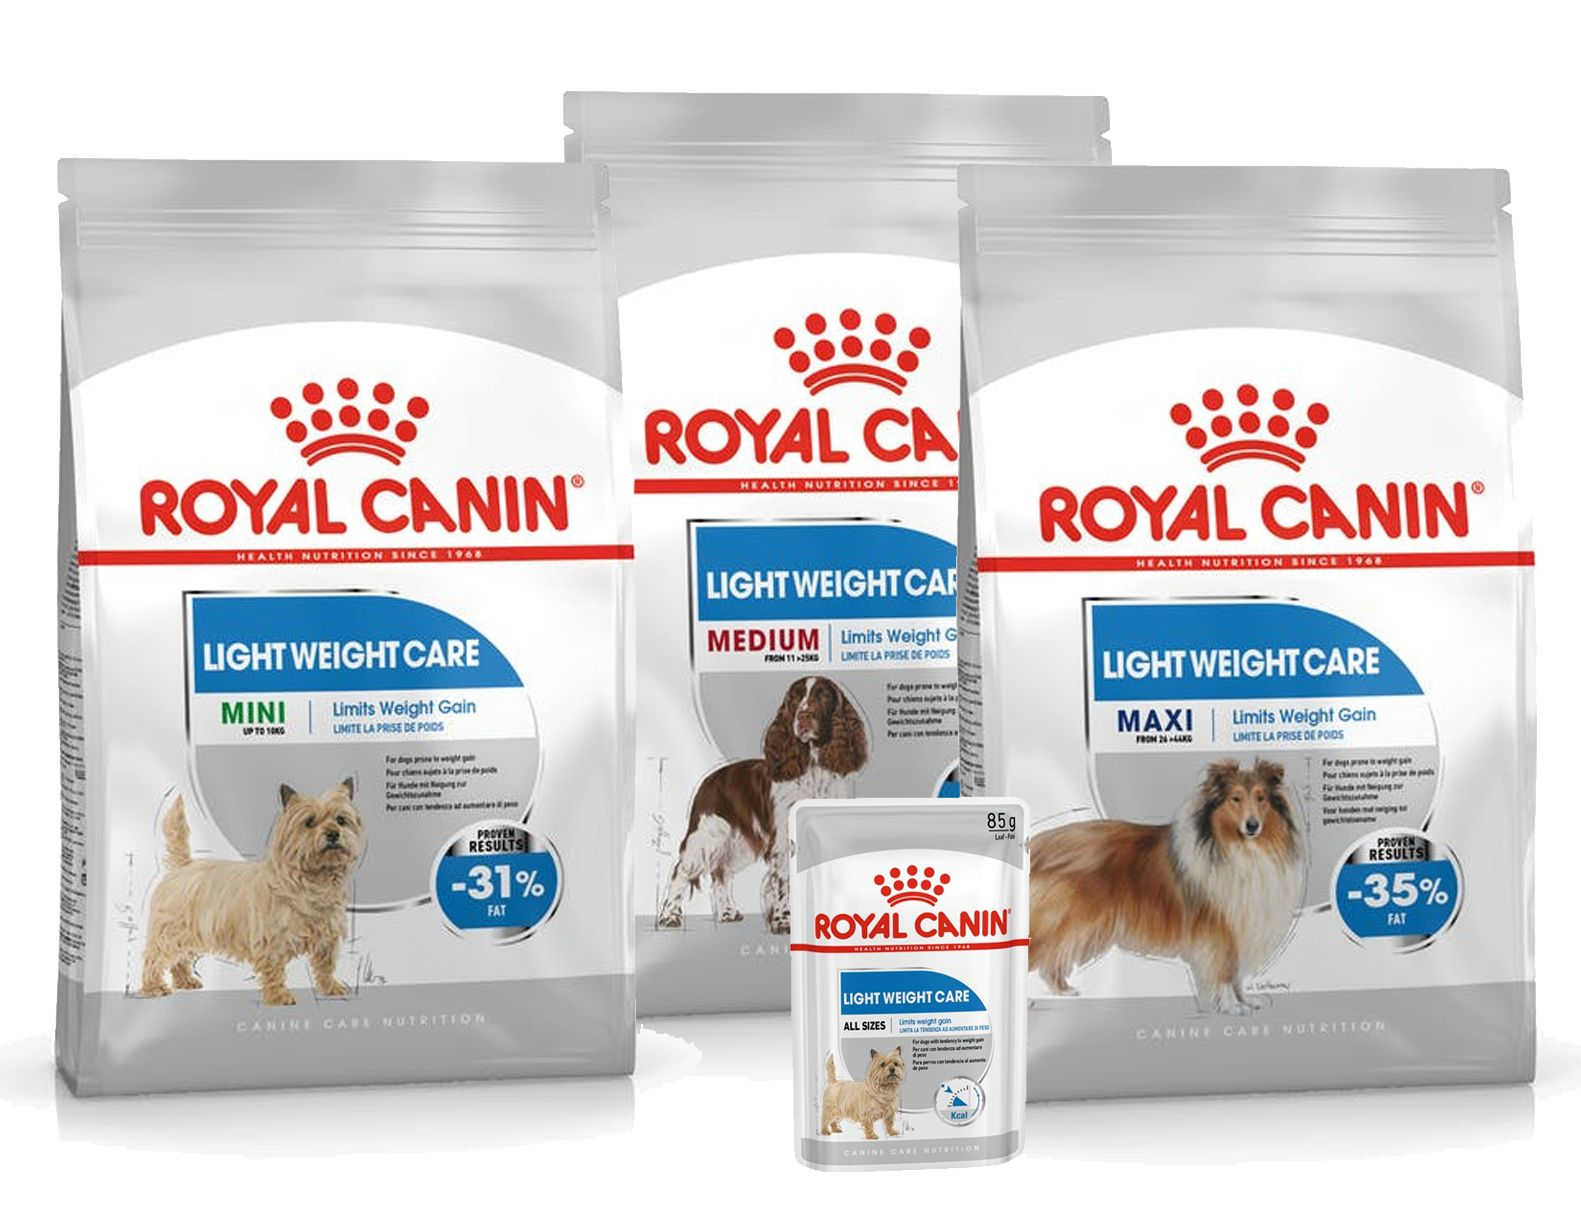 Light Weight Care for mini, medium and maxi dogs